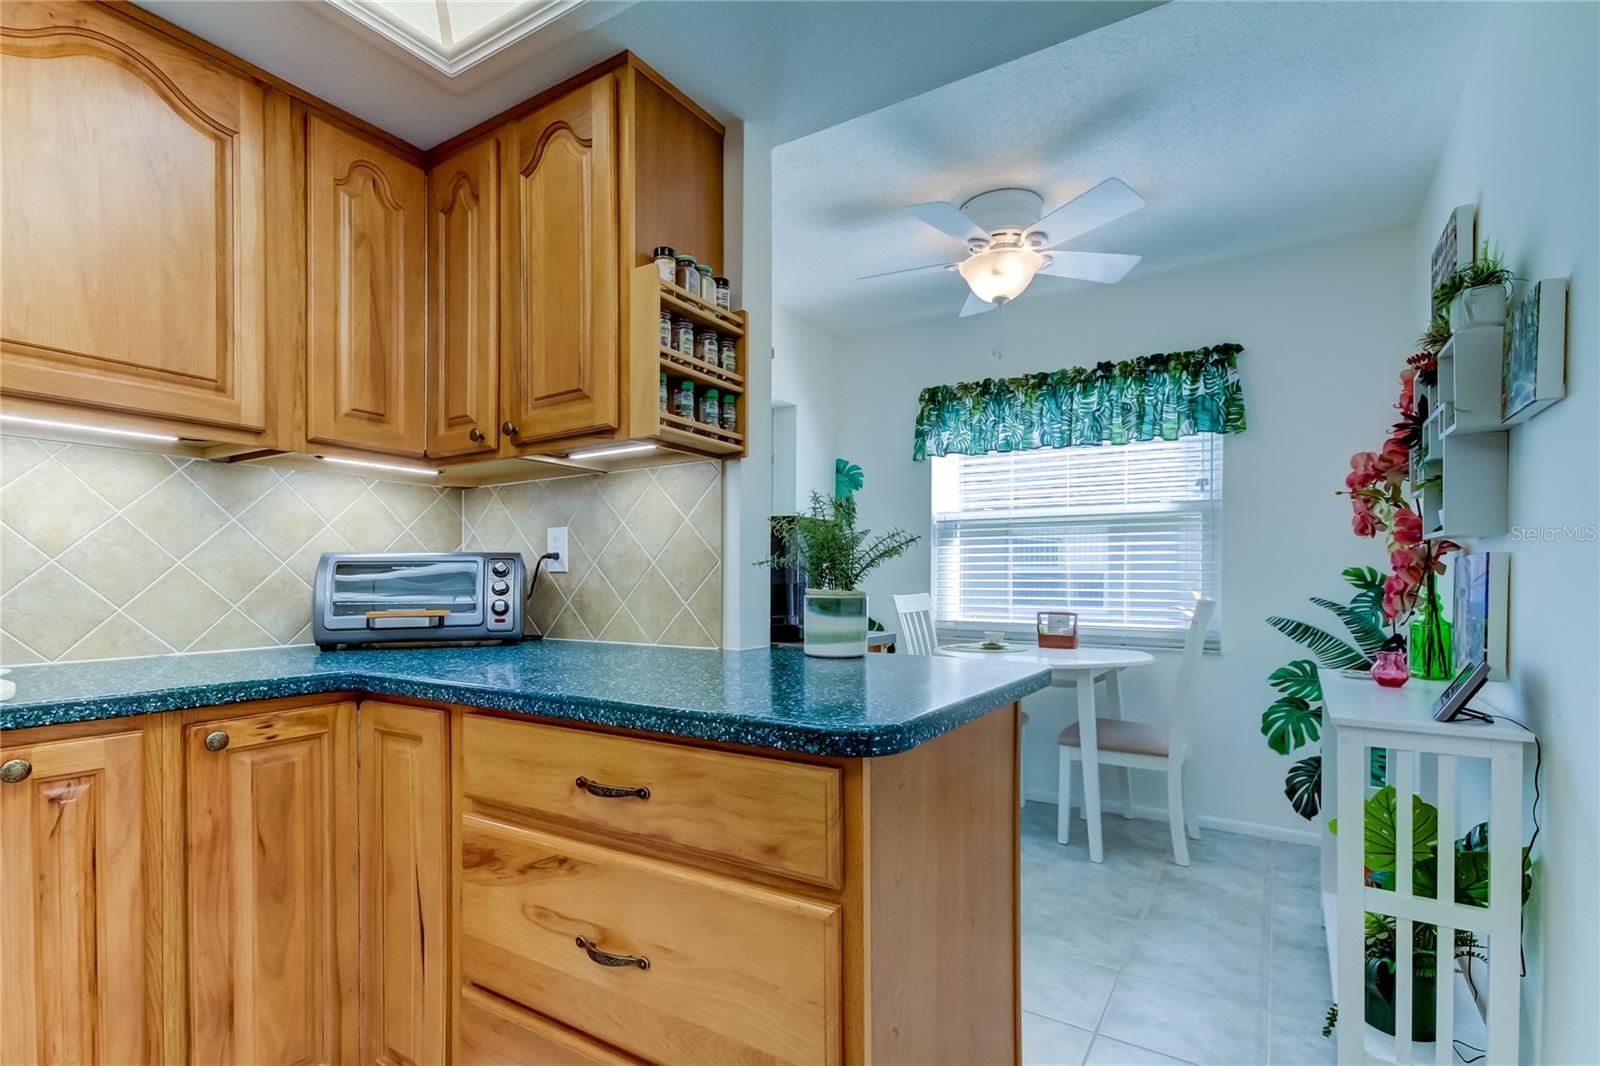 Kitchen Flows Seamlessly into a Very Spacious Eat In Section (7.1' x 8.2')!